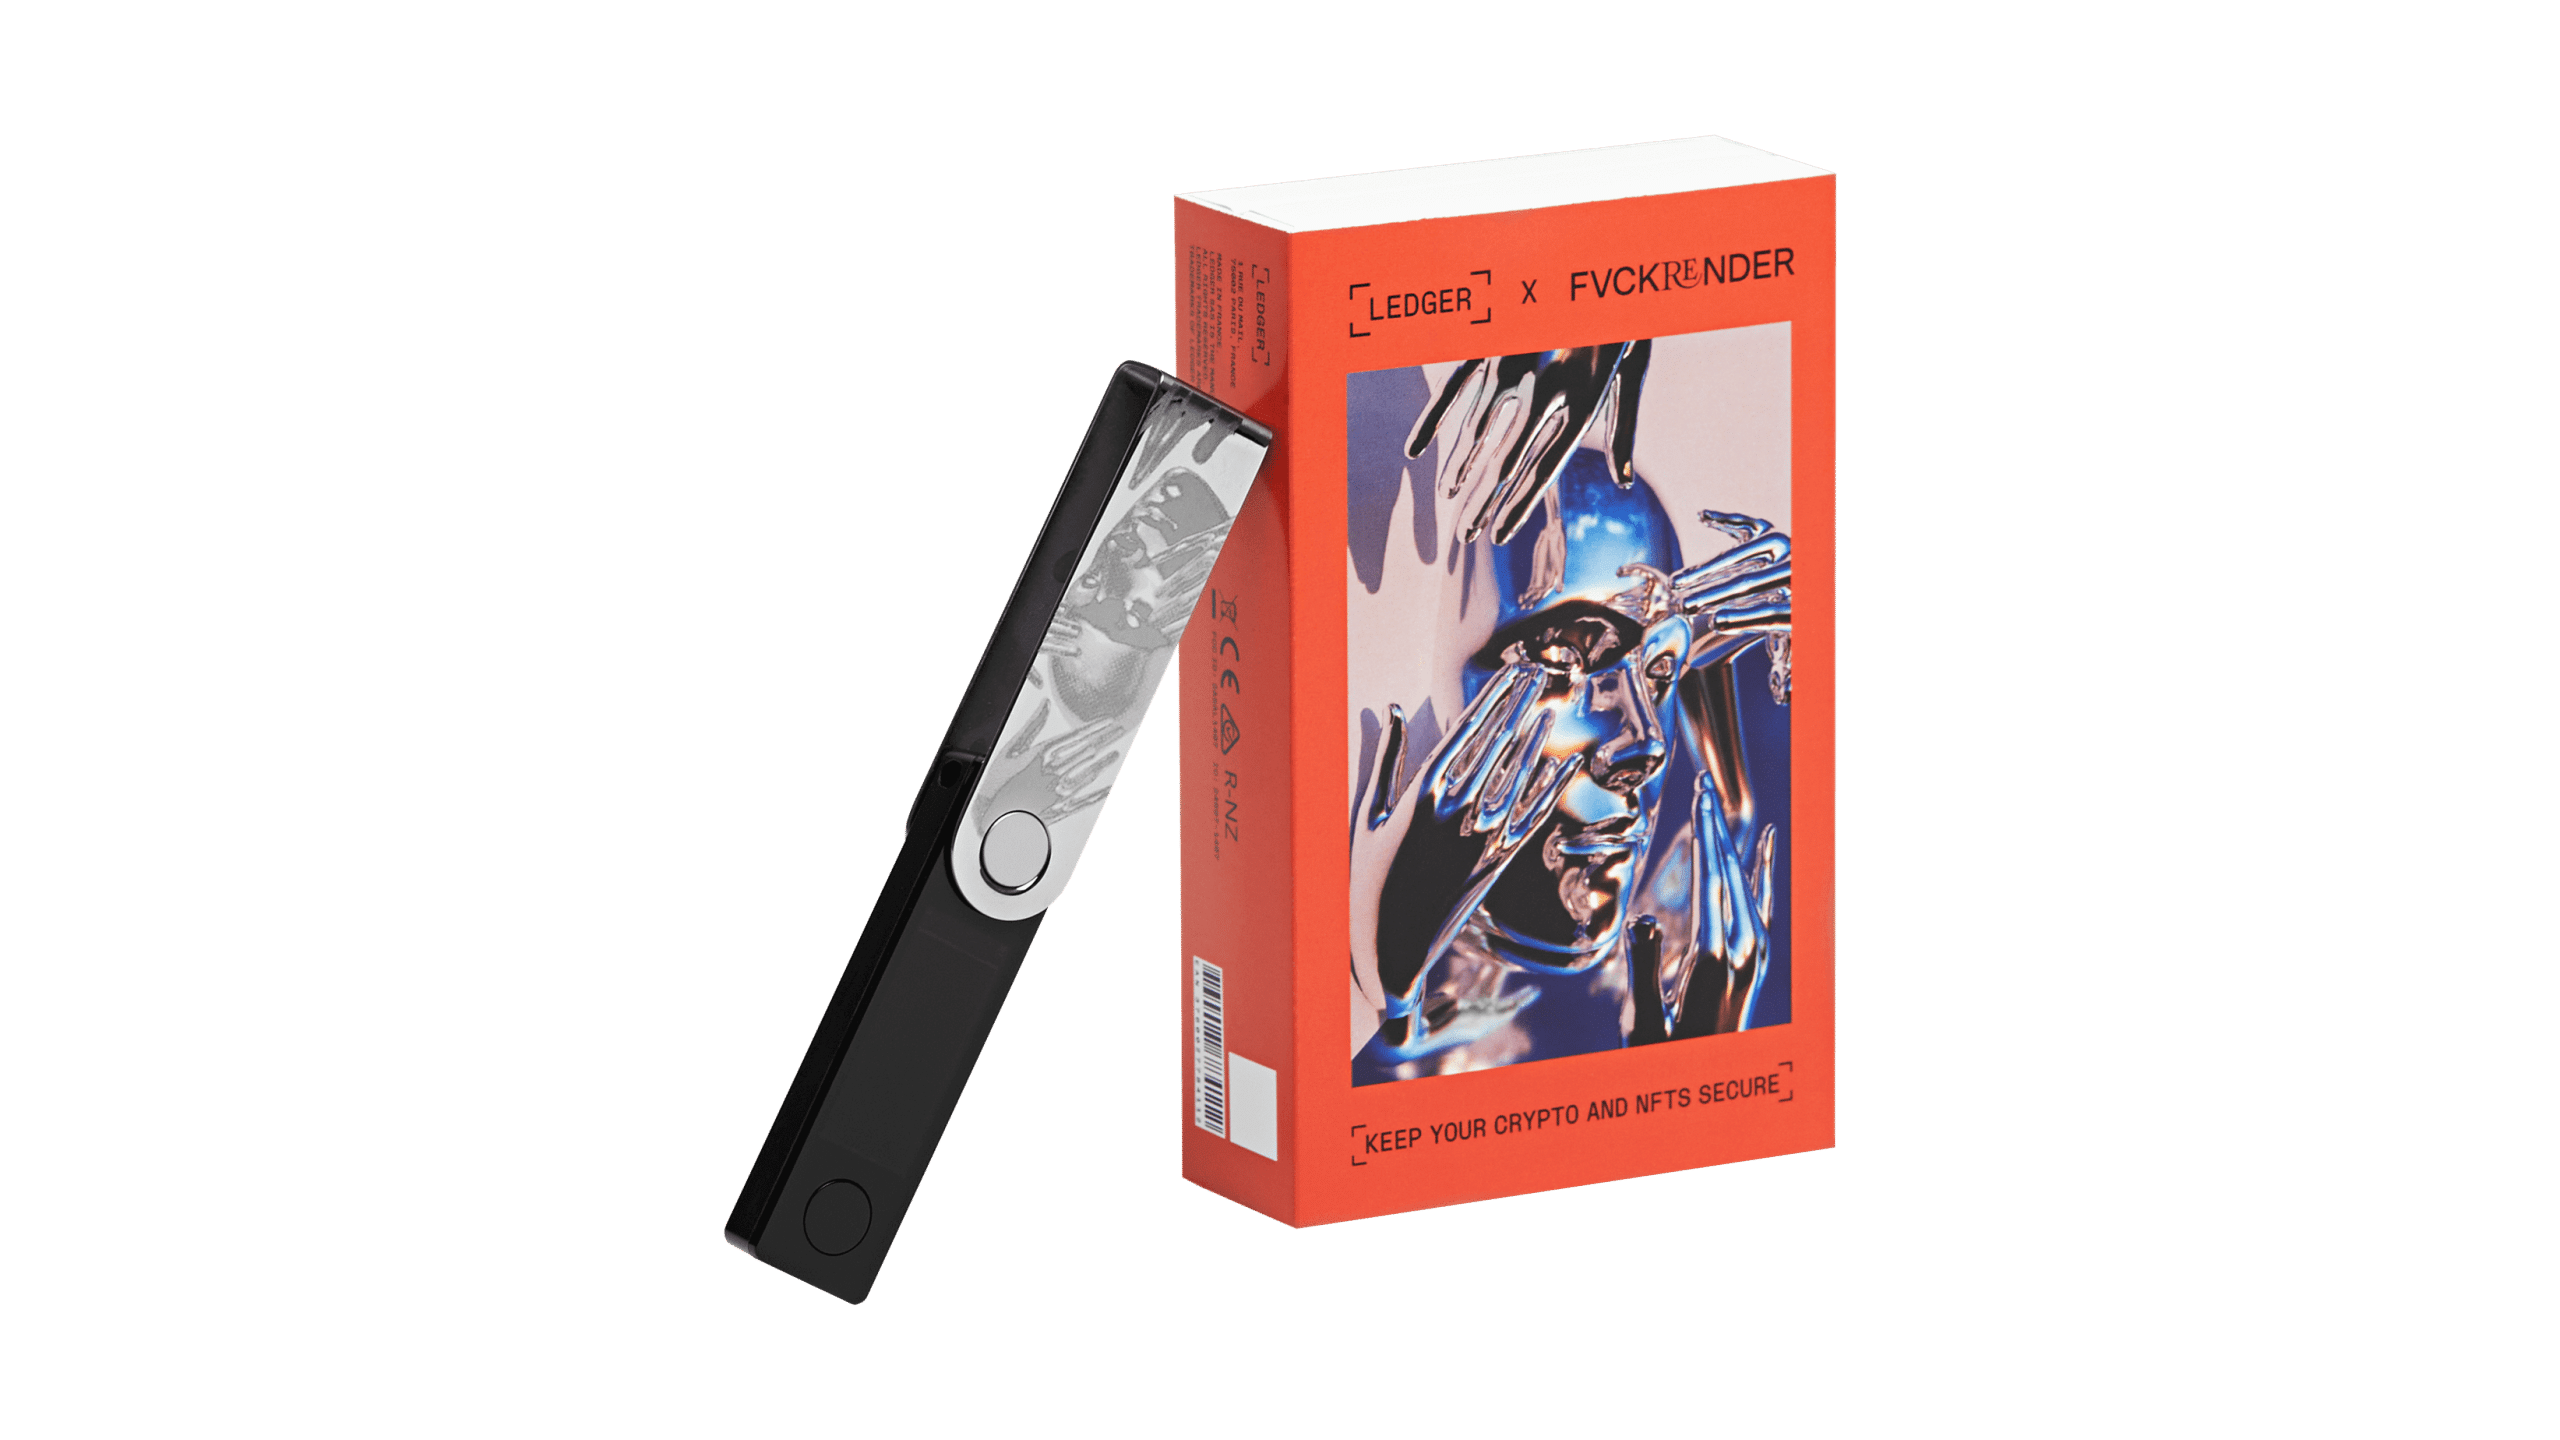 Ledger and FVCKRENDER Launch Limited-Edition Nano X, More Collabs Coming